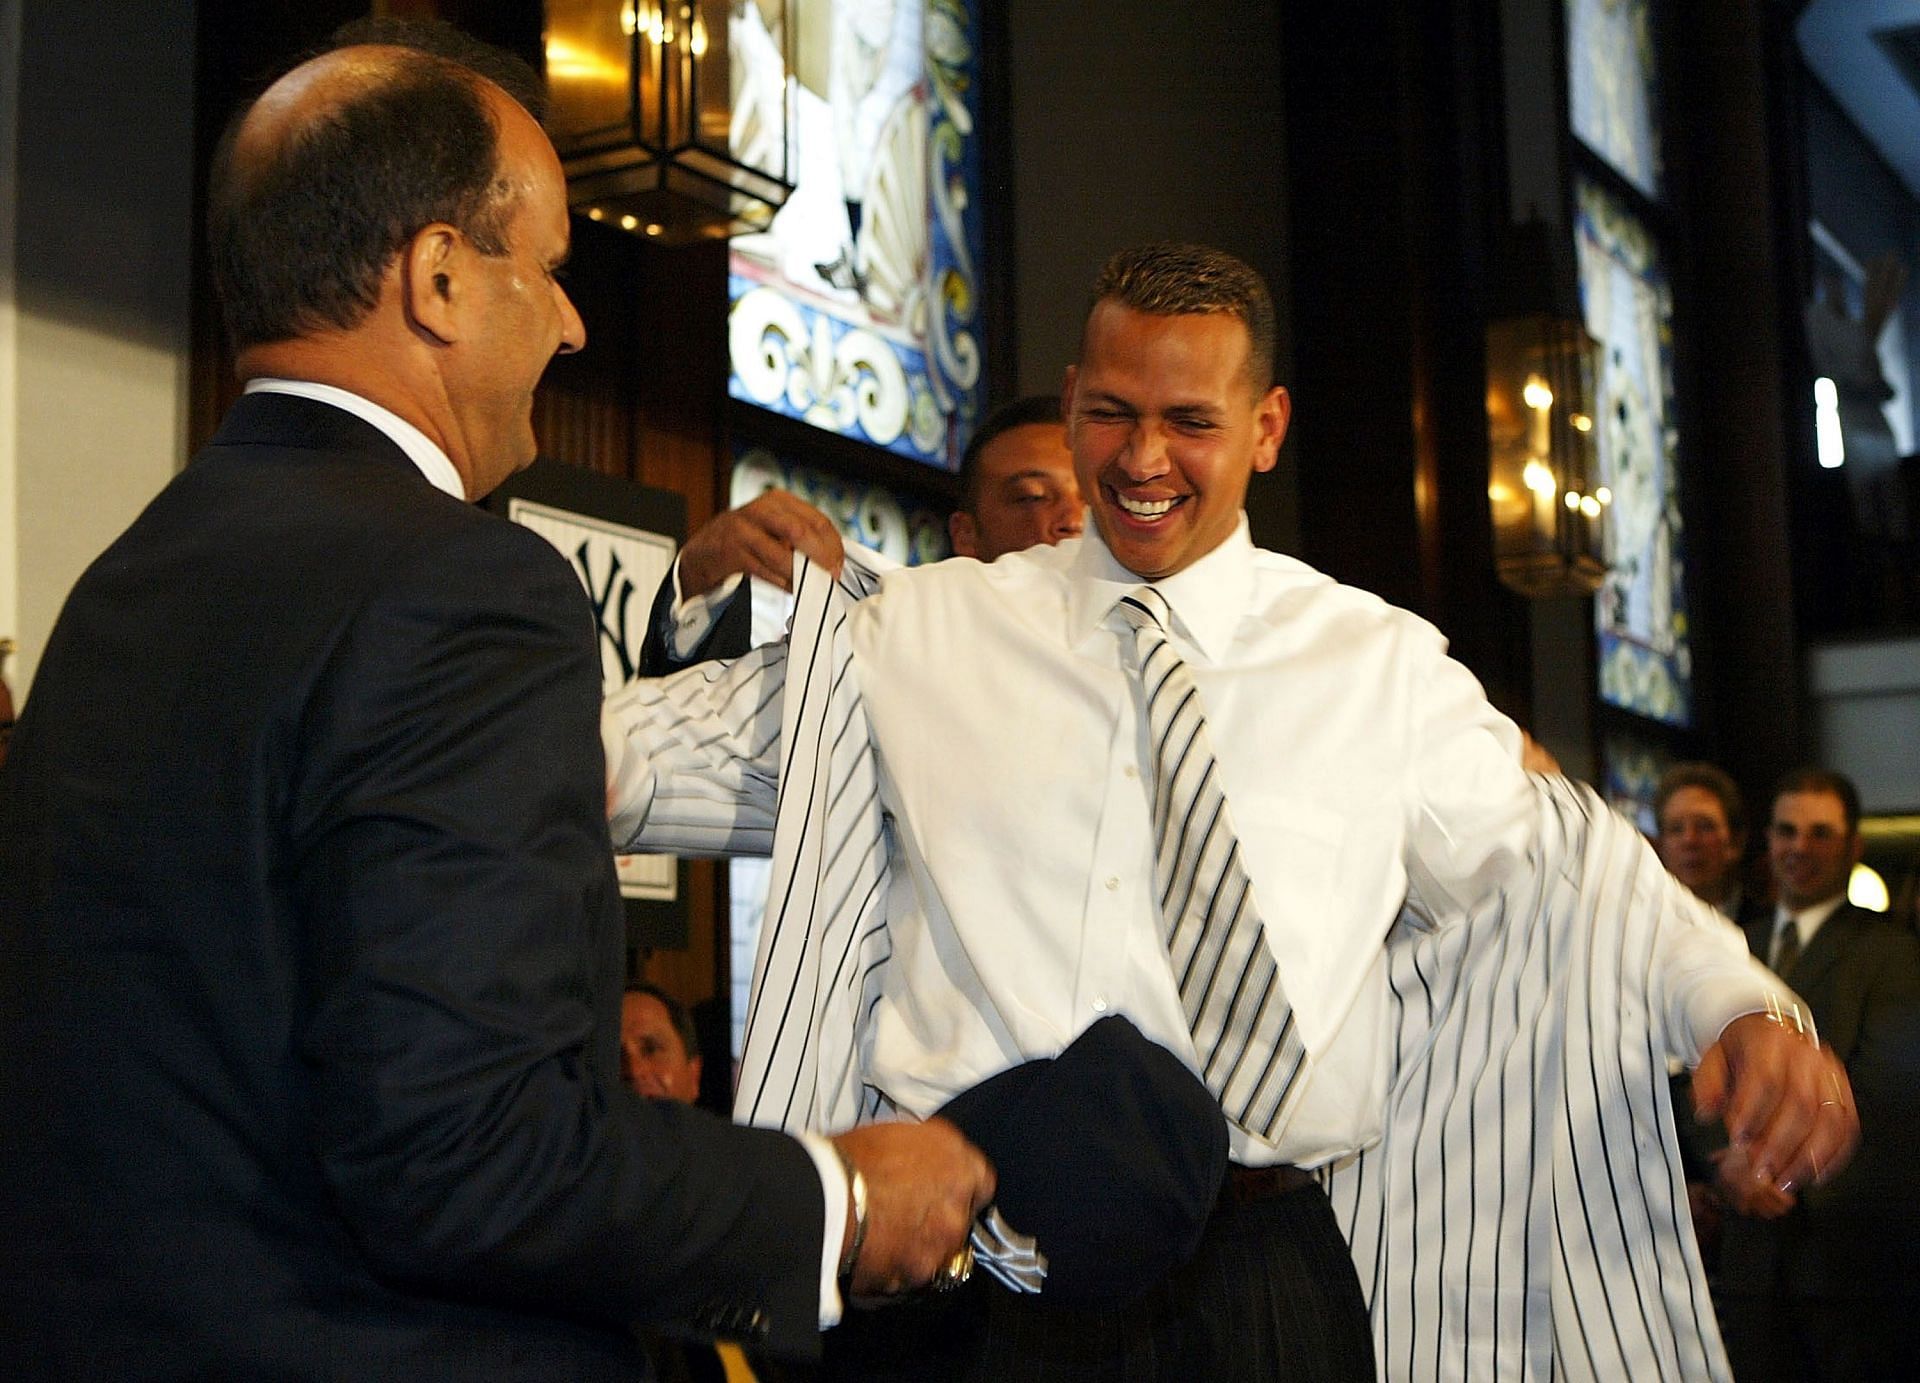 Joe Torre's Memoir Reveals About The Other Side Of A-Rod